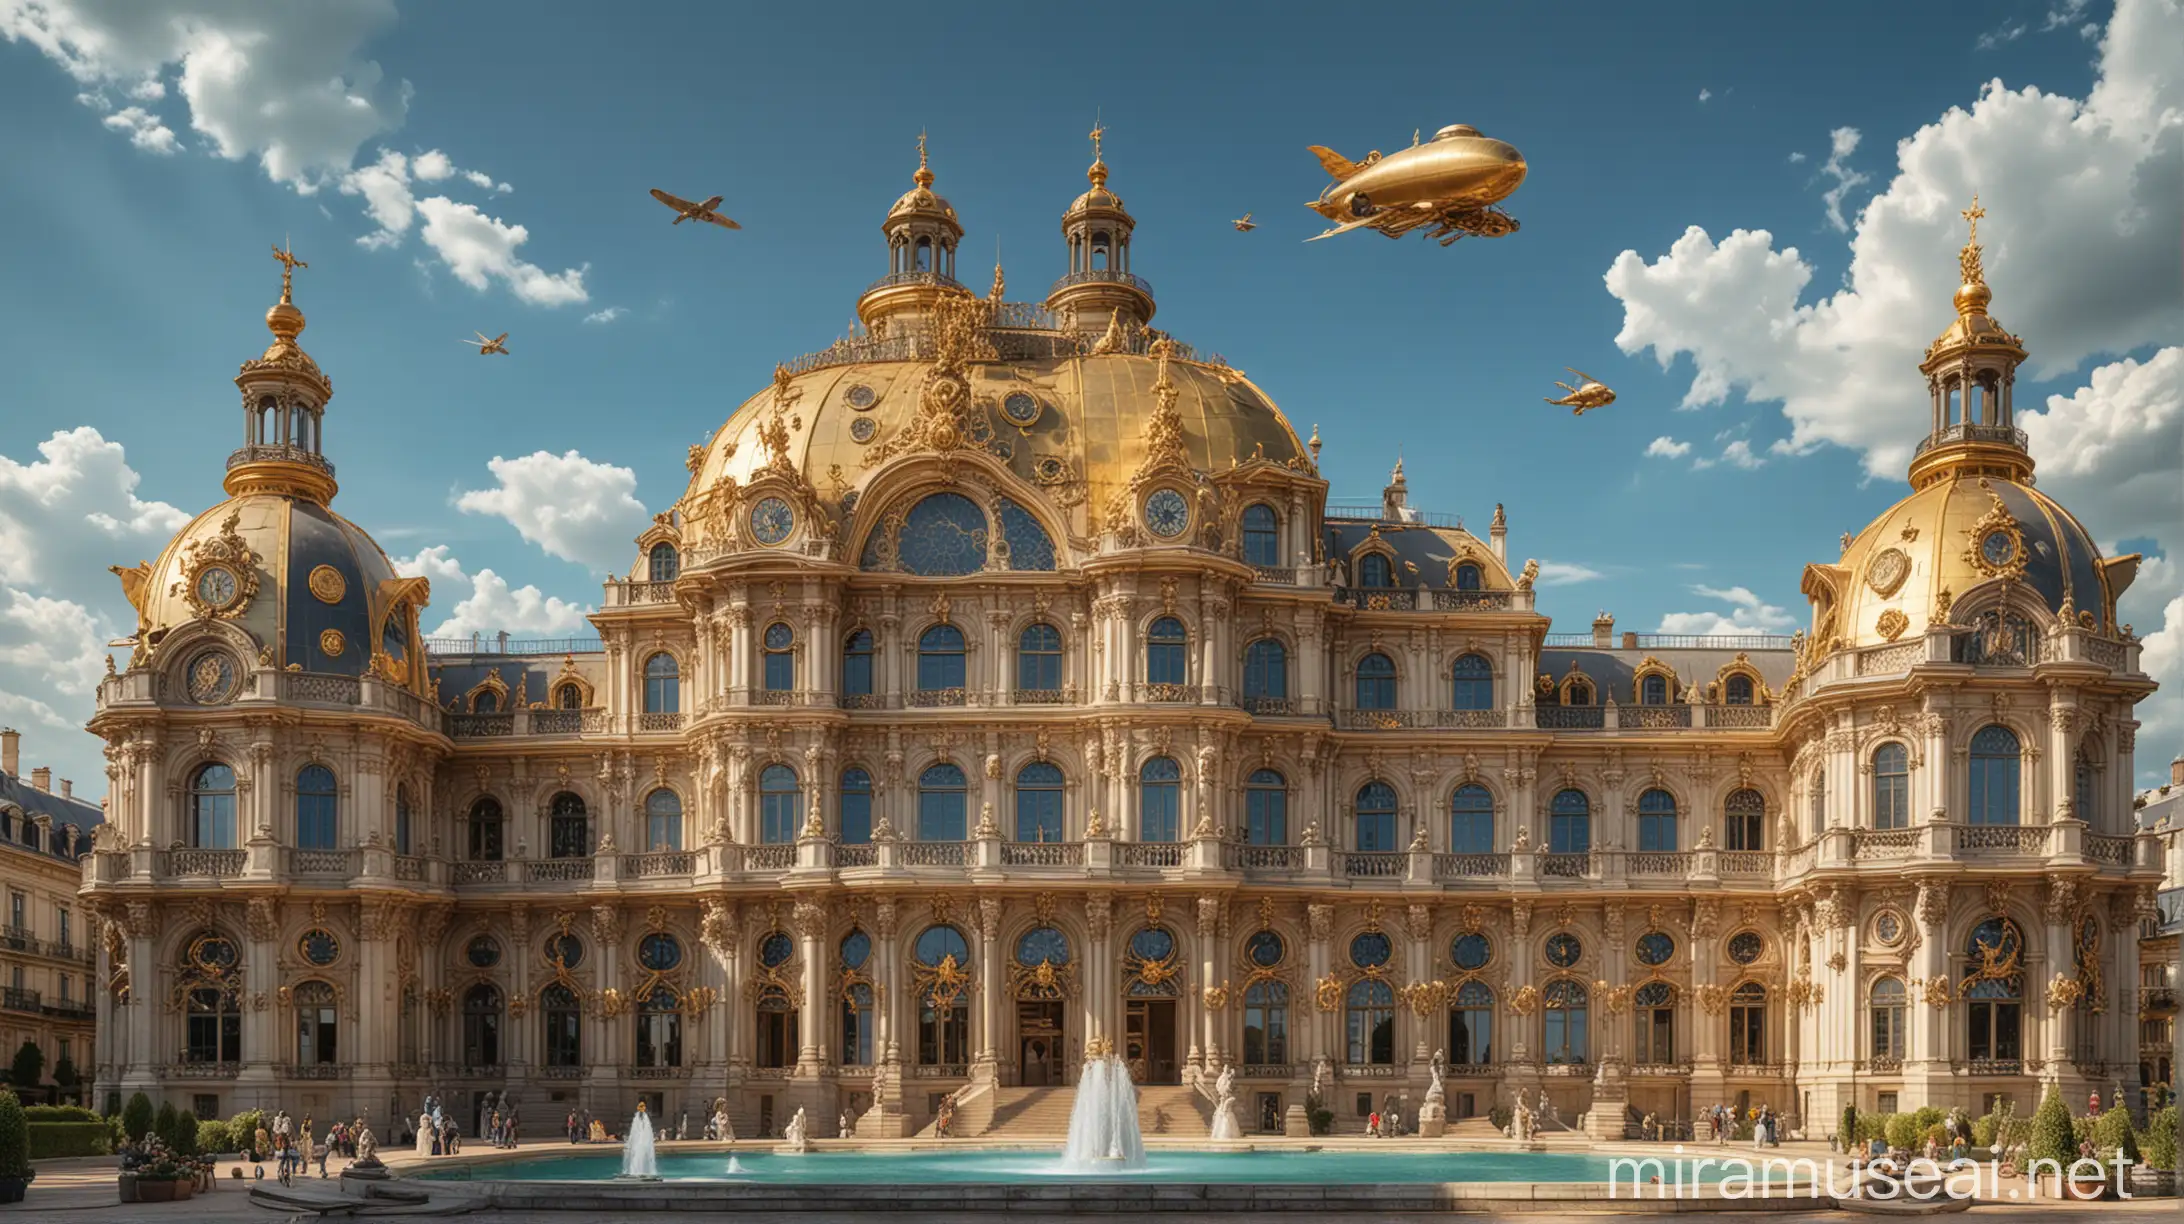 Grand French Baroque Palace with Astrological Gold Roof and Steampunk Zeppelins